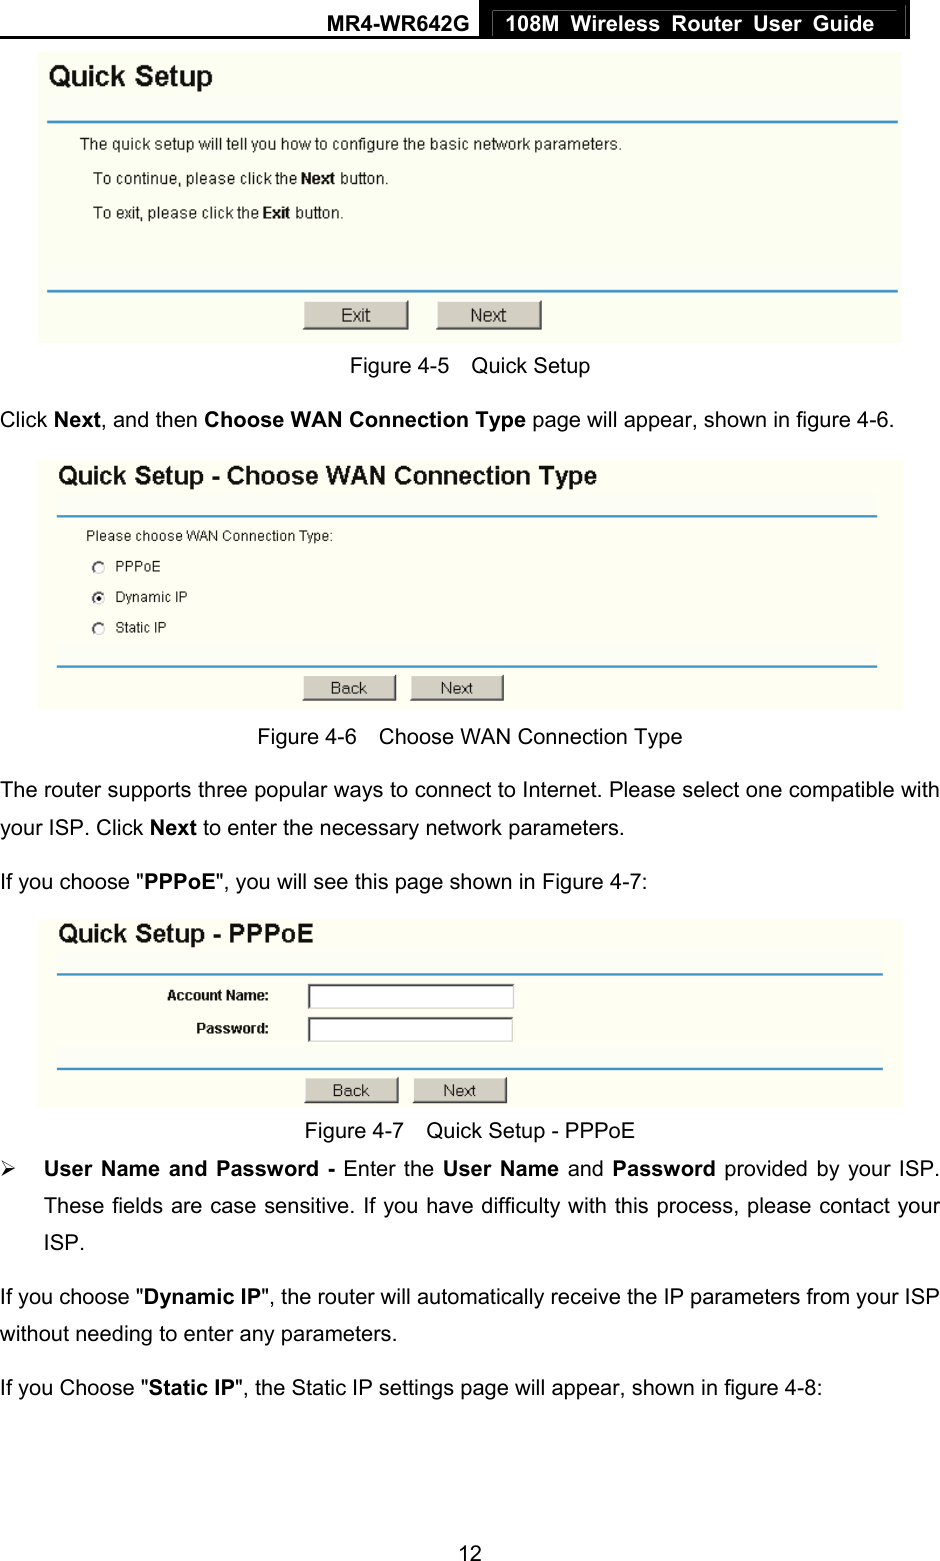 MR4-WR642G 108M Wireless Router User Guide   12 Figure 4-5  Quick Setup Click Next, and then Choose WAN Connection Type page will appear, shown in figure 4-6.  Figure 4-6    Choose WAN Connection Type The router supports three popular ways to connect to Internet. Please select one compatible with your ISP. Click Next to enter the necessary network parameters. If you choose &quot;PPPoE&quot;, you will see this page shown in Figure 4-7:    Figure 4-7    Quick Setup - PPPoE ¾ User Name and Password - Enter the User Name and Password provided by your ISP. These fields are case sensitive. If you have difficulty with this process, please contact your ISP. If you choose &quot;Dynamic IP&quot;, the router will automatically receive the IP parameters from your ISP without needing to enter any parameters. If you Choose &quot;Static IP&quot;, the Static IP settings page will appear, shown in figure 4-8:   